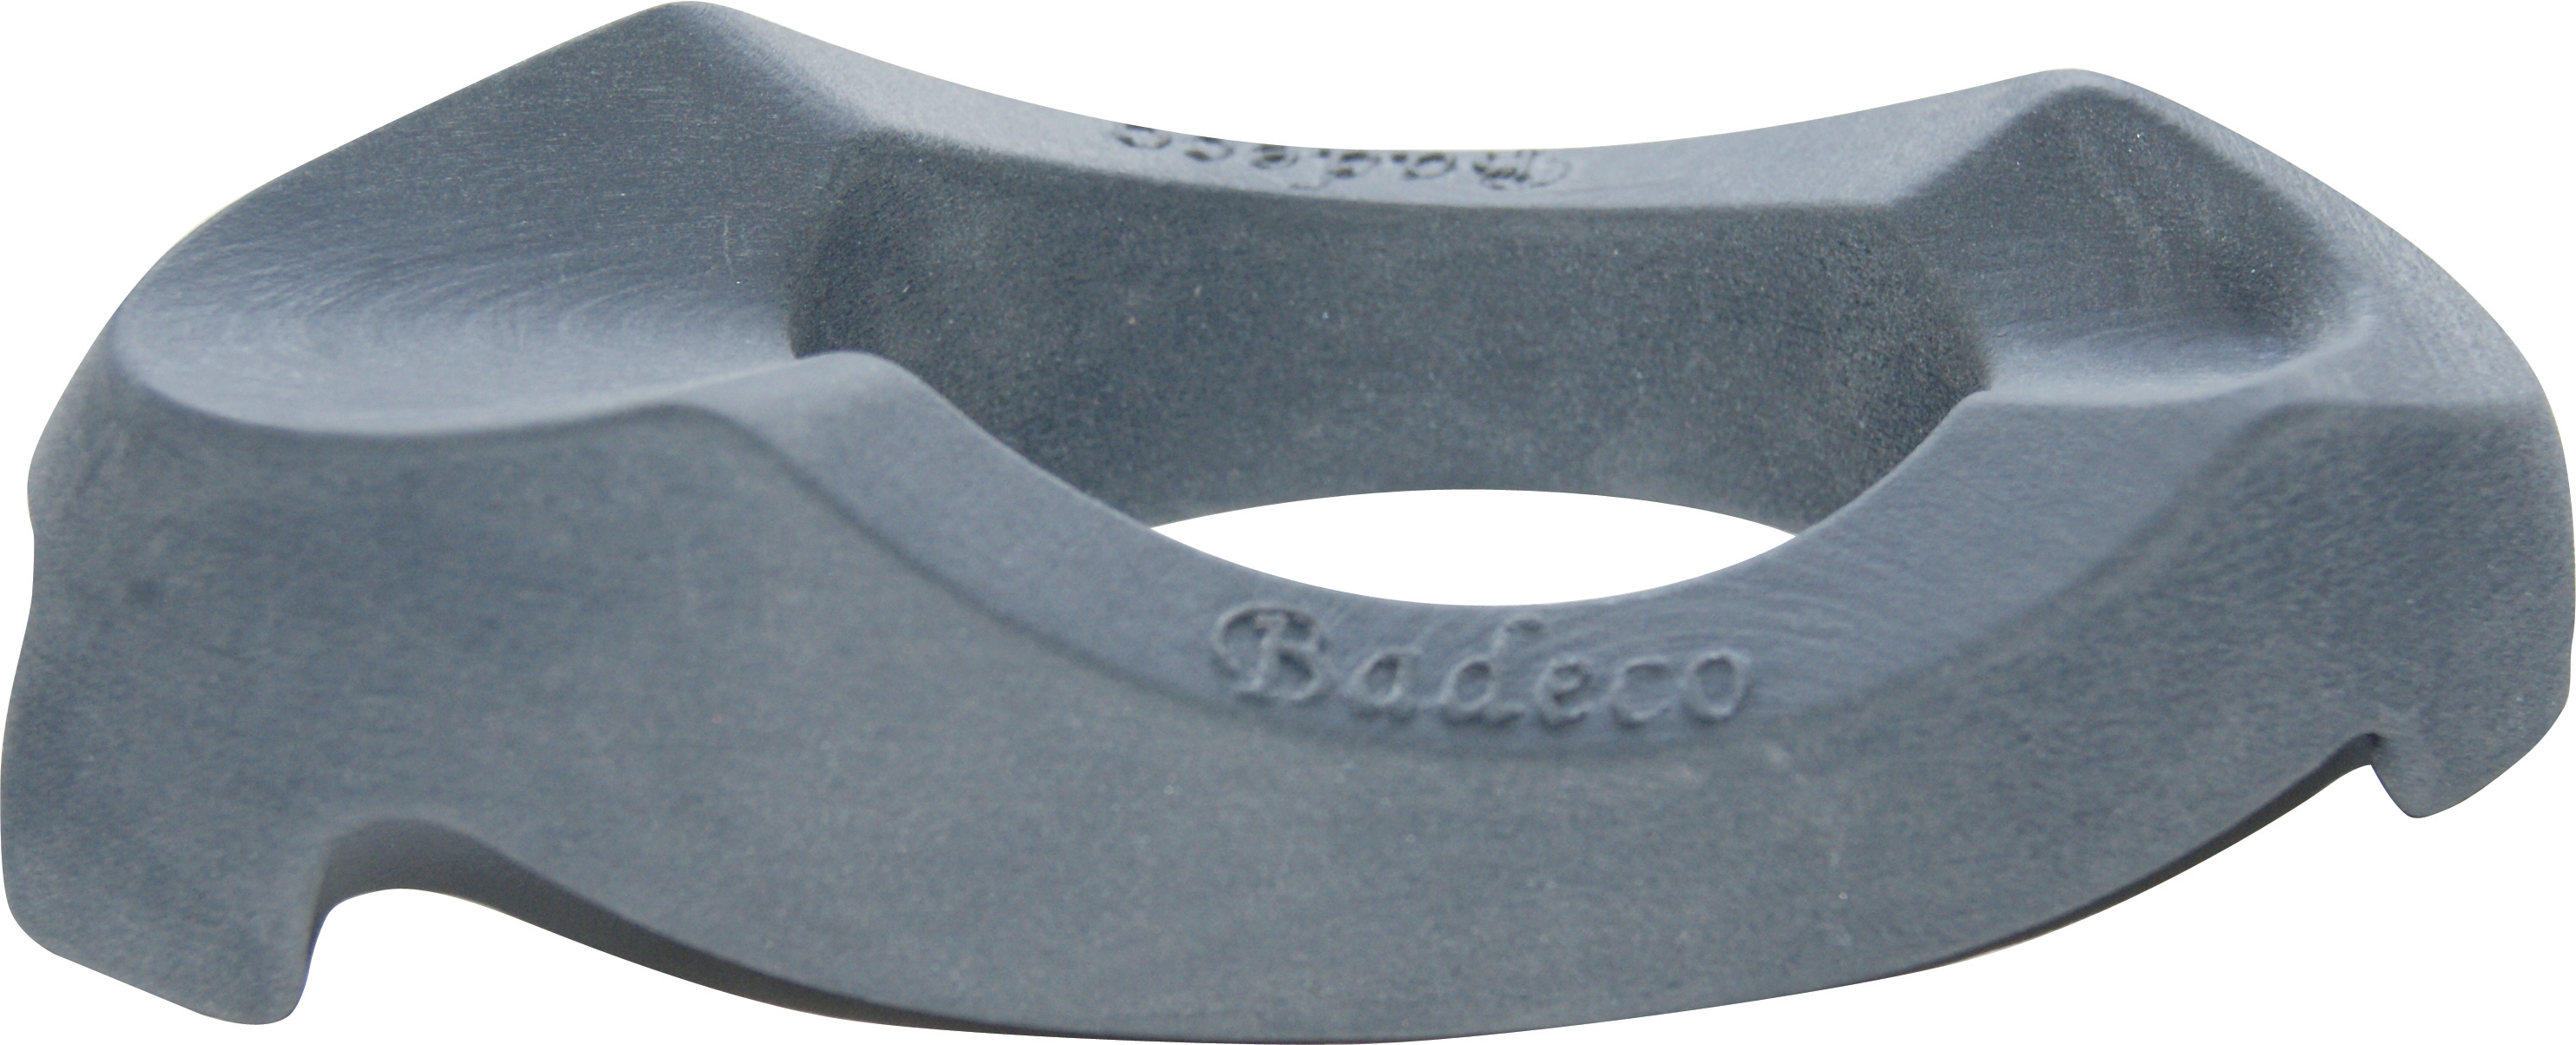 Handpiece support Badeco for all handpieces